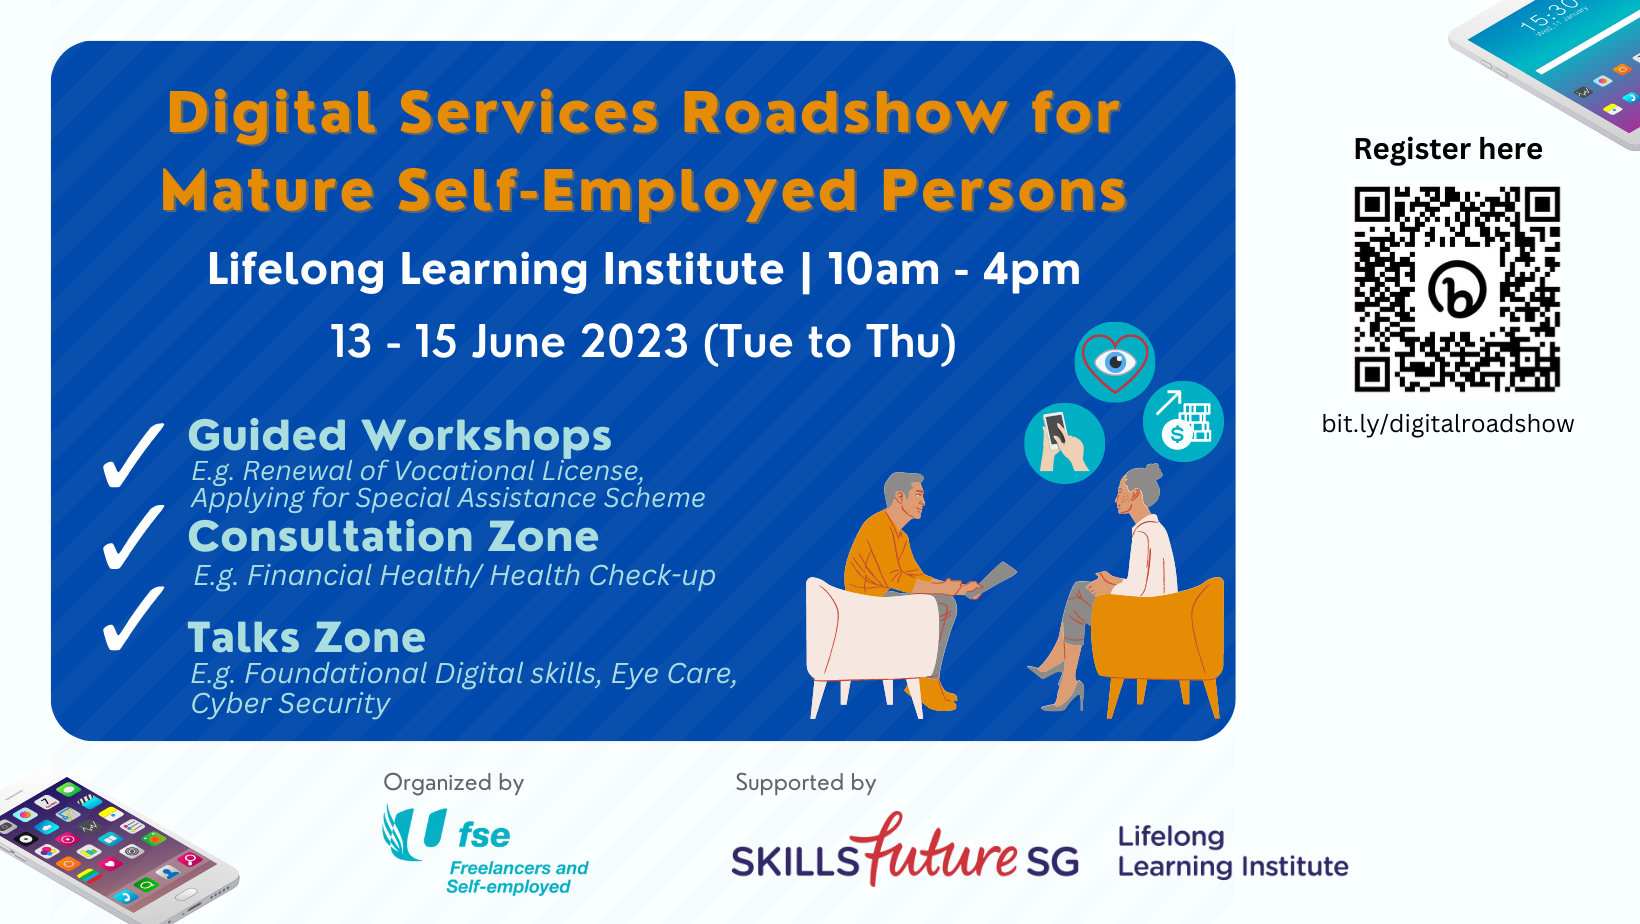 Digital Services Roadshow for Mature Self-Employed Persons (2).png